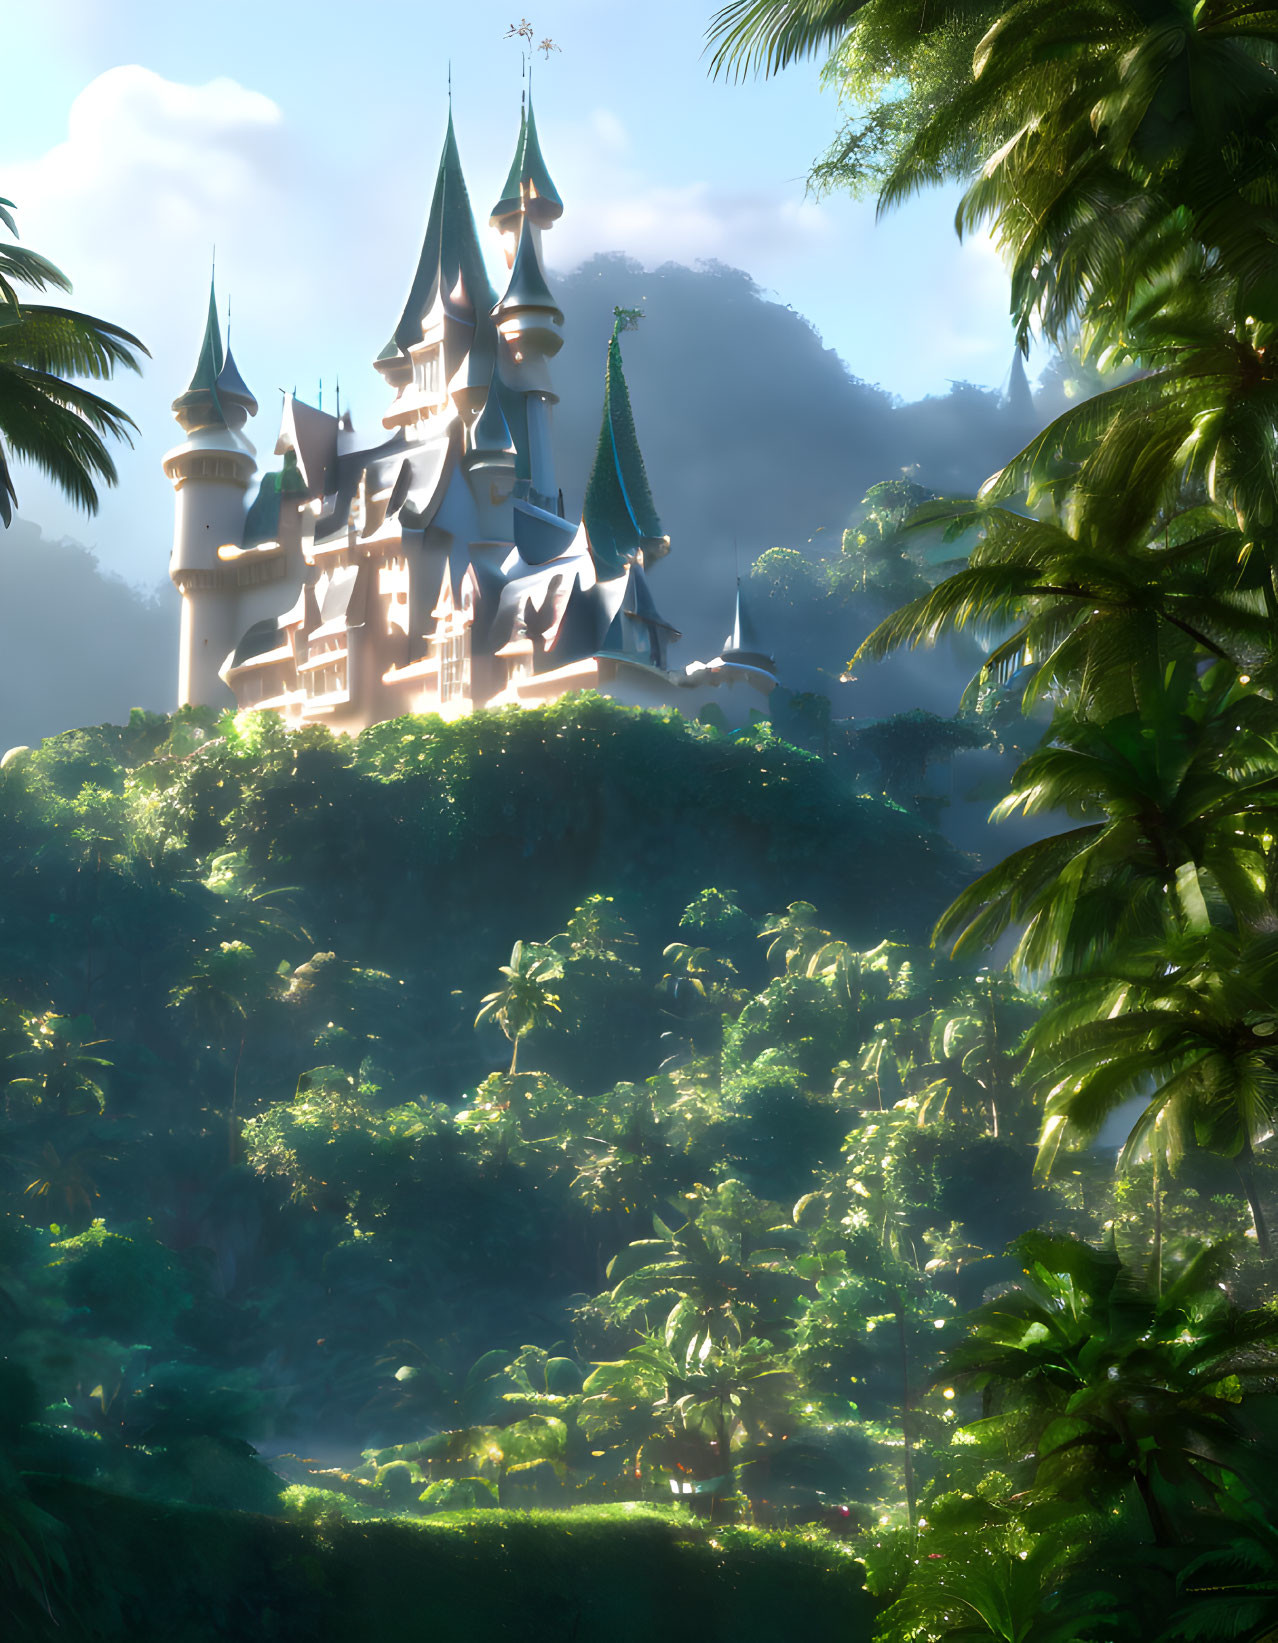 Majestic castle with spires in lush forest with palm trees